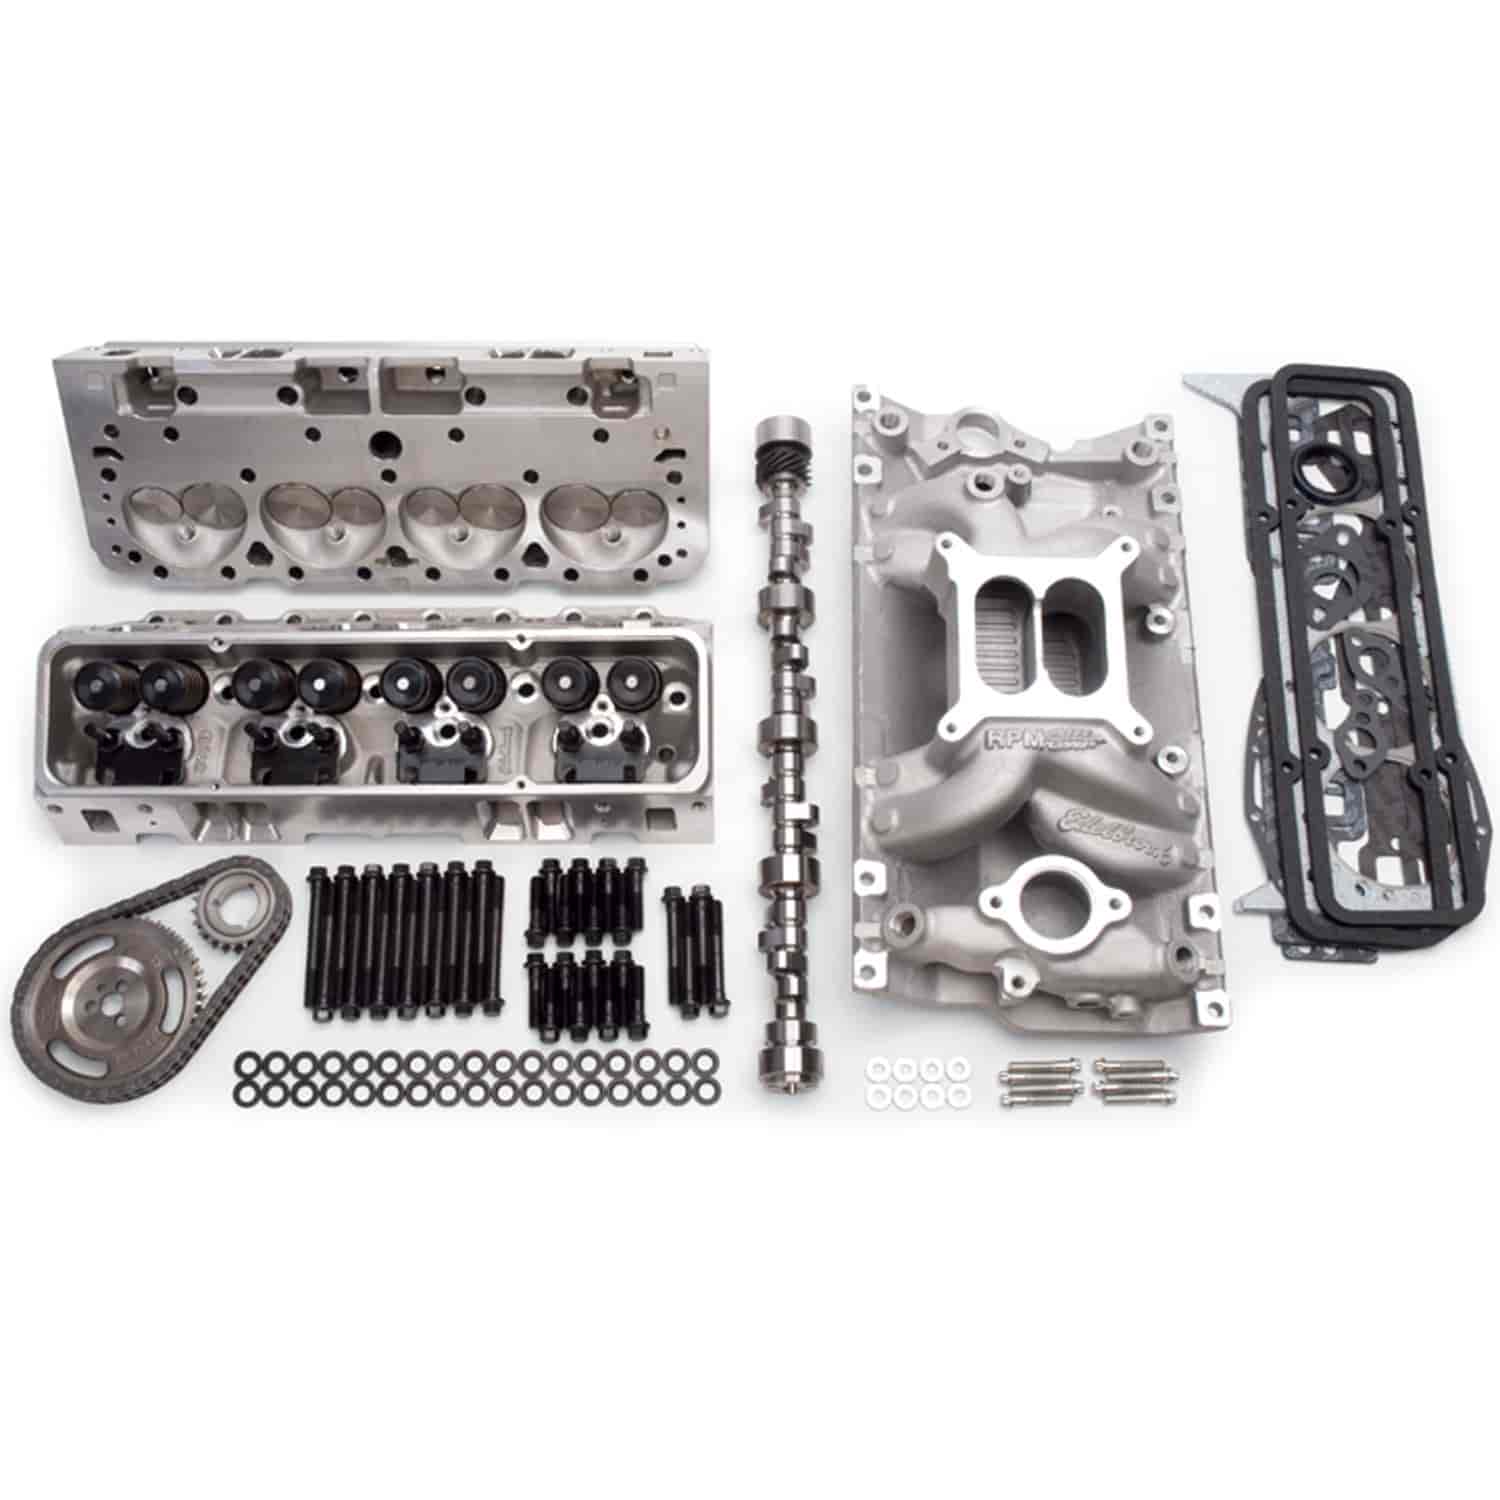 RPM Power Package Top End Kit for 1987-Later Small Block Chevy 383